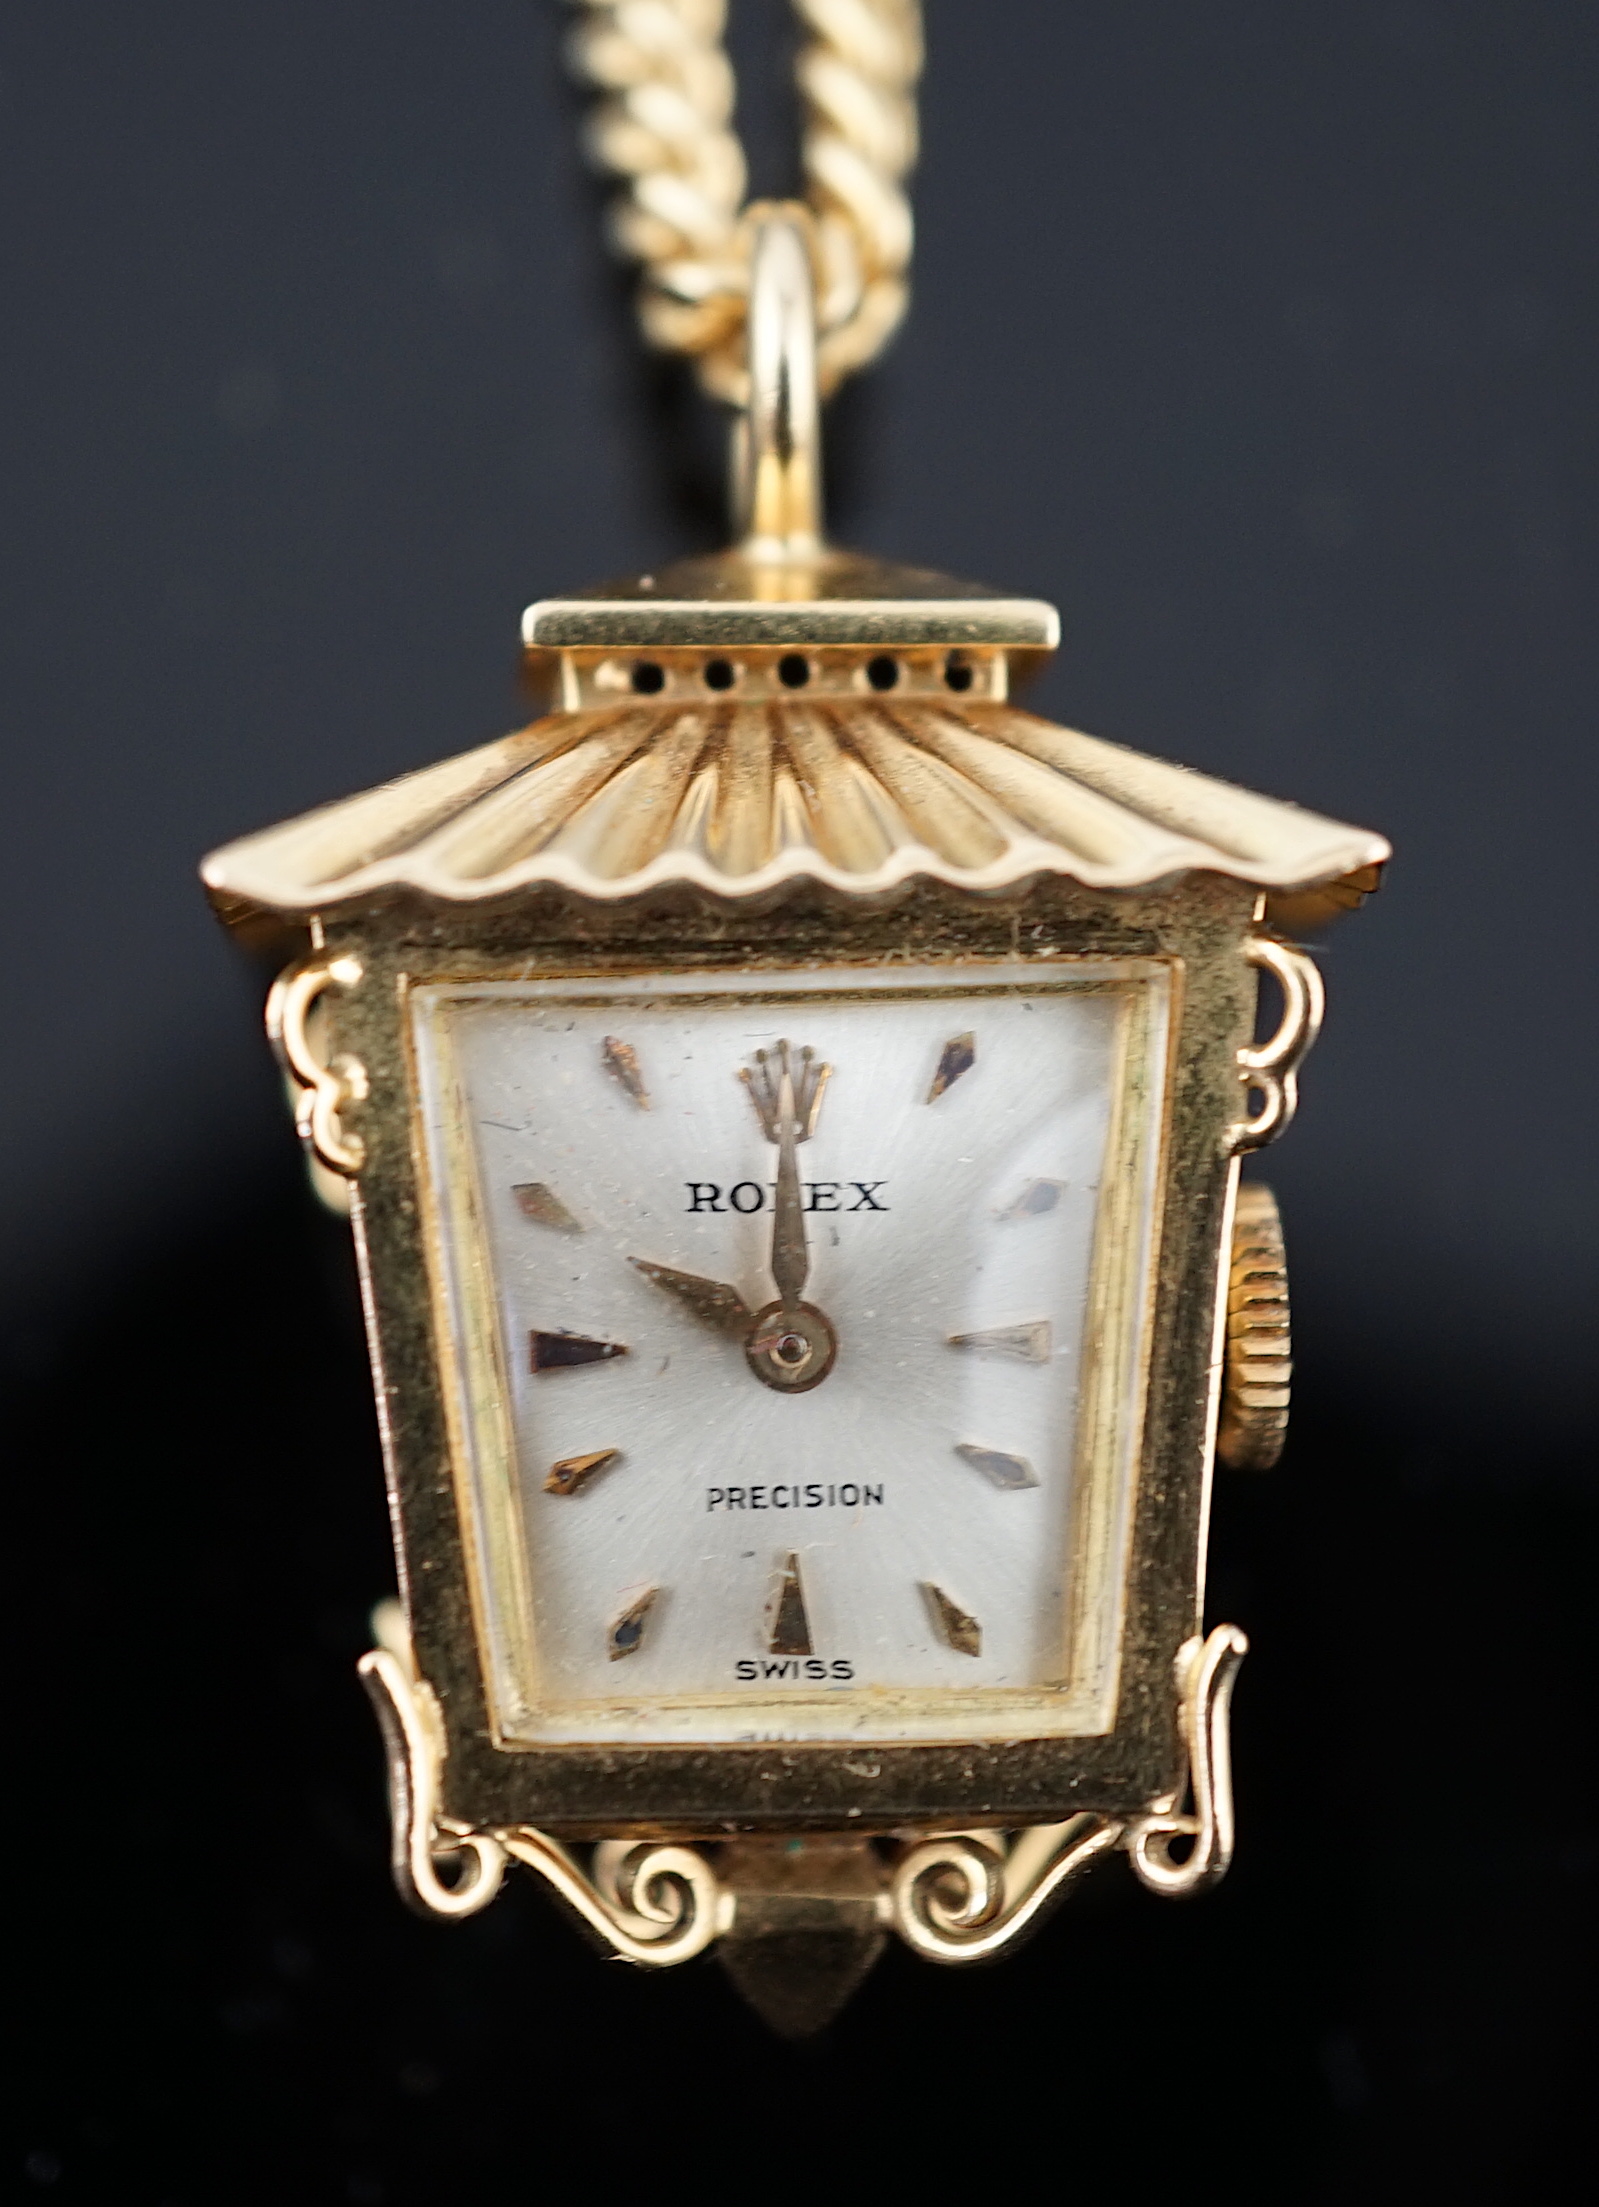 A lady's novelty gold Rolex pendant fob watch, modelled as a lantern, with baton numerals, together with an 18ct gold chain